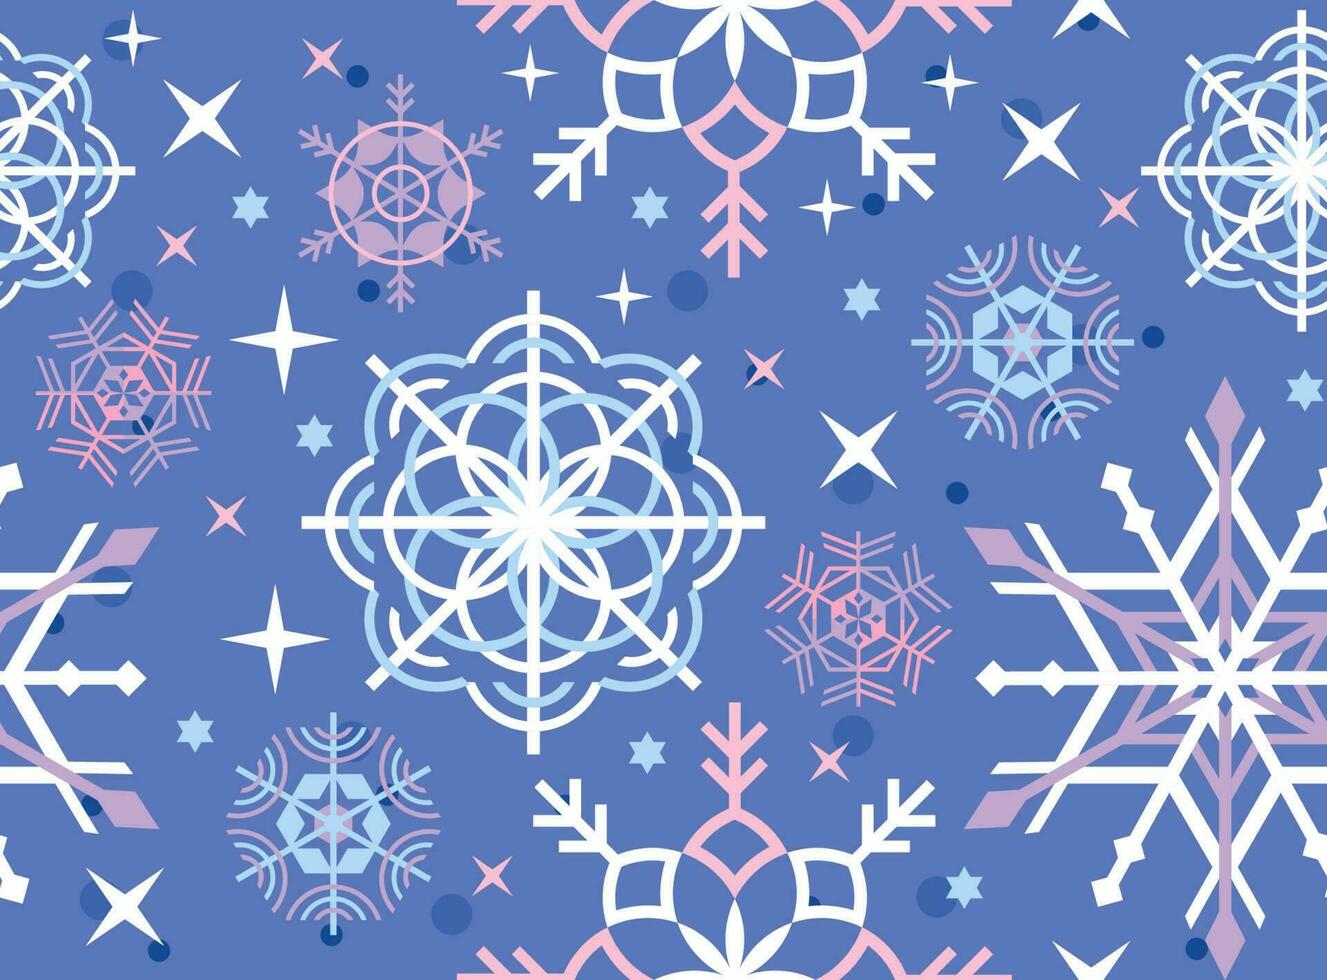 Snowflakes Winter Holidays Seamless Background vector